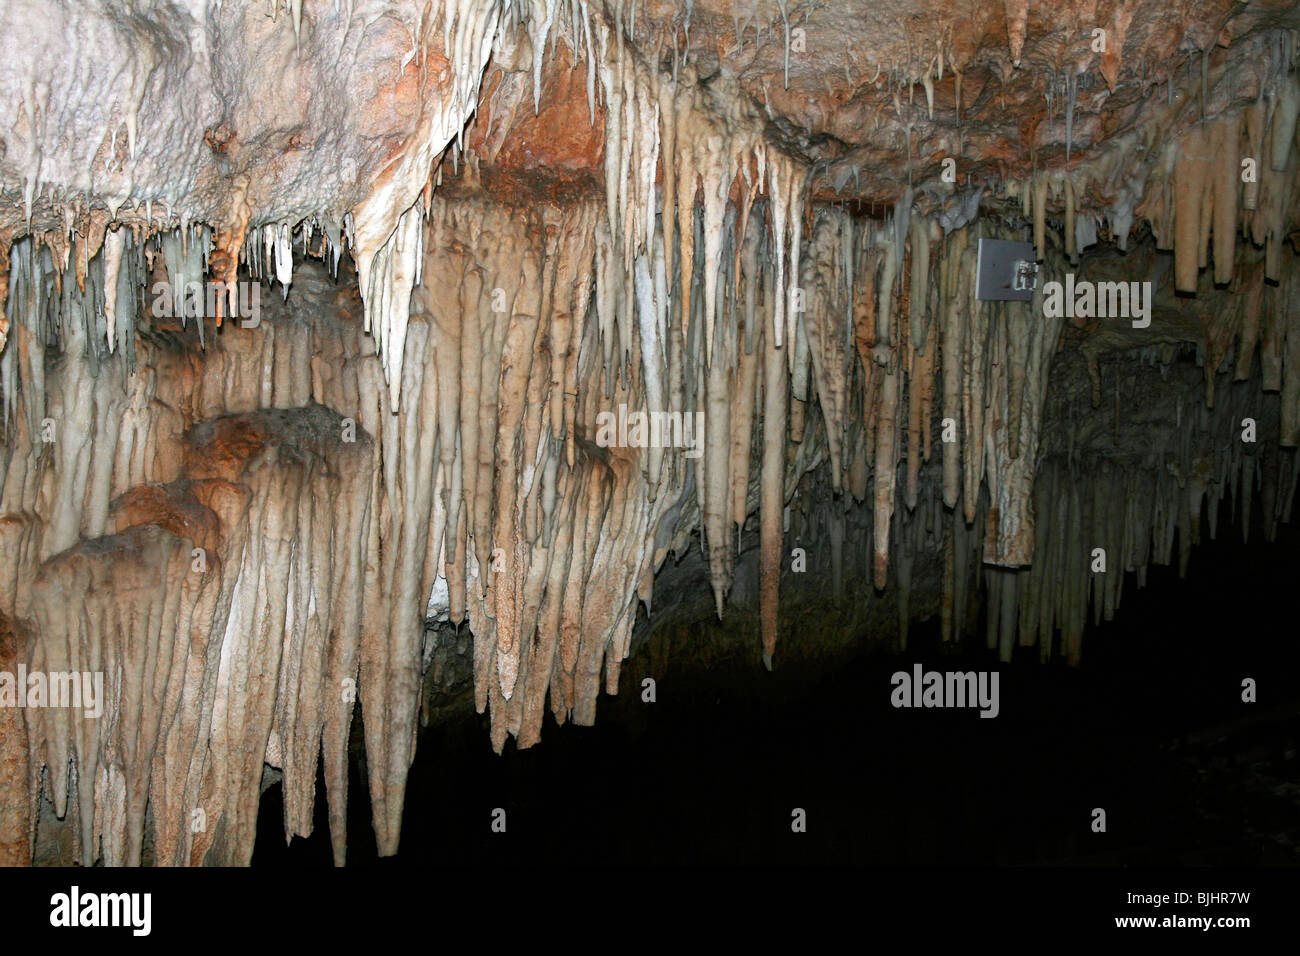 Bermuda's Crystal Cave is the best known of the island's  underground caverns. Pictured here is a section of white stalactites. Stock Photo